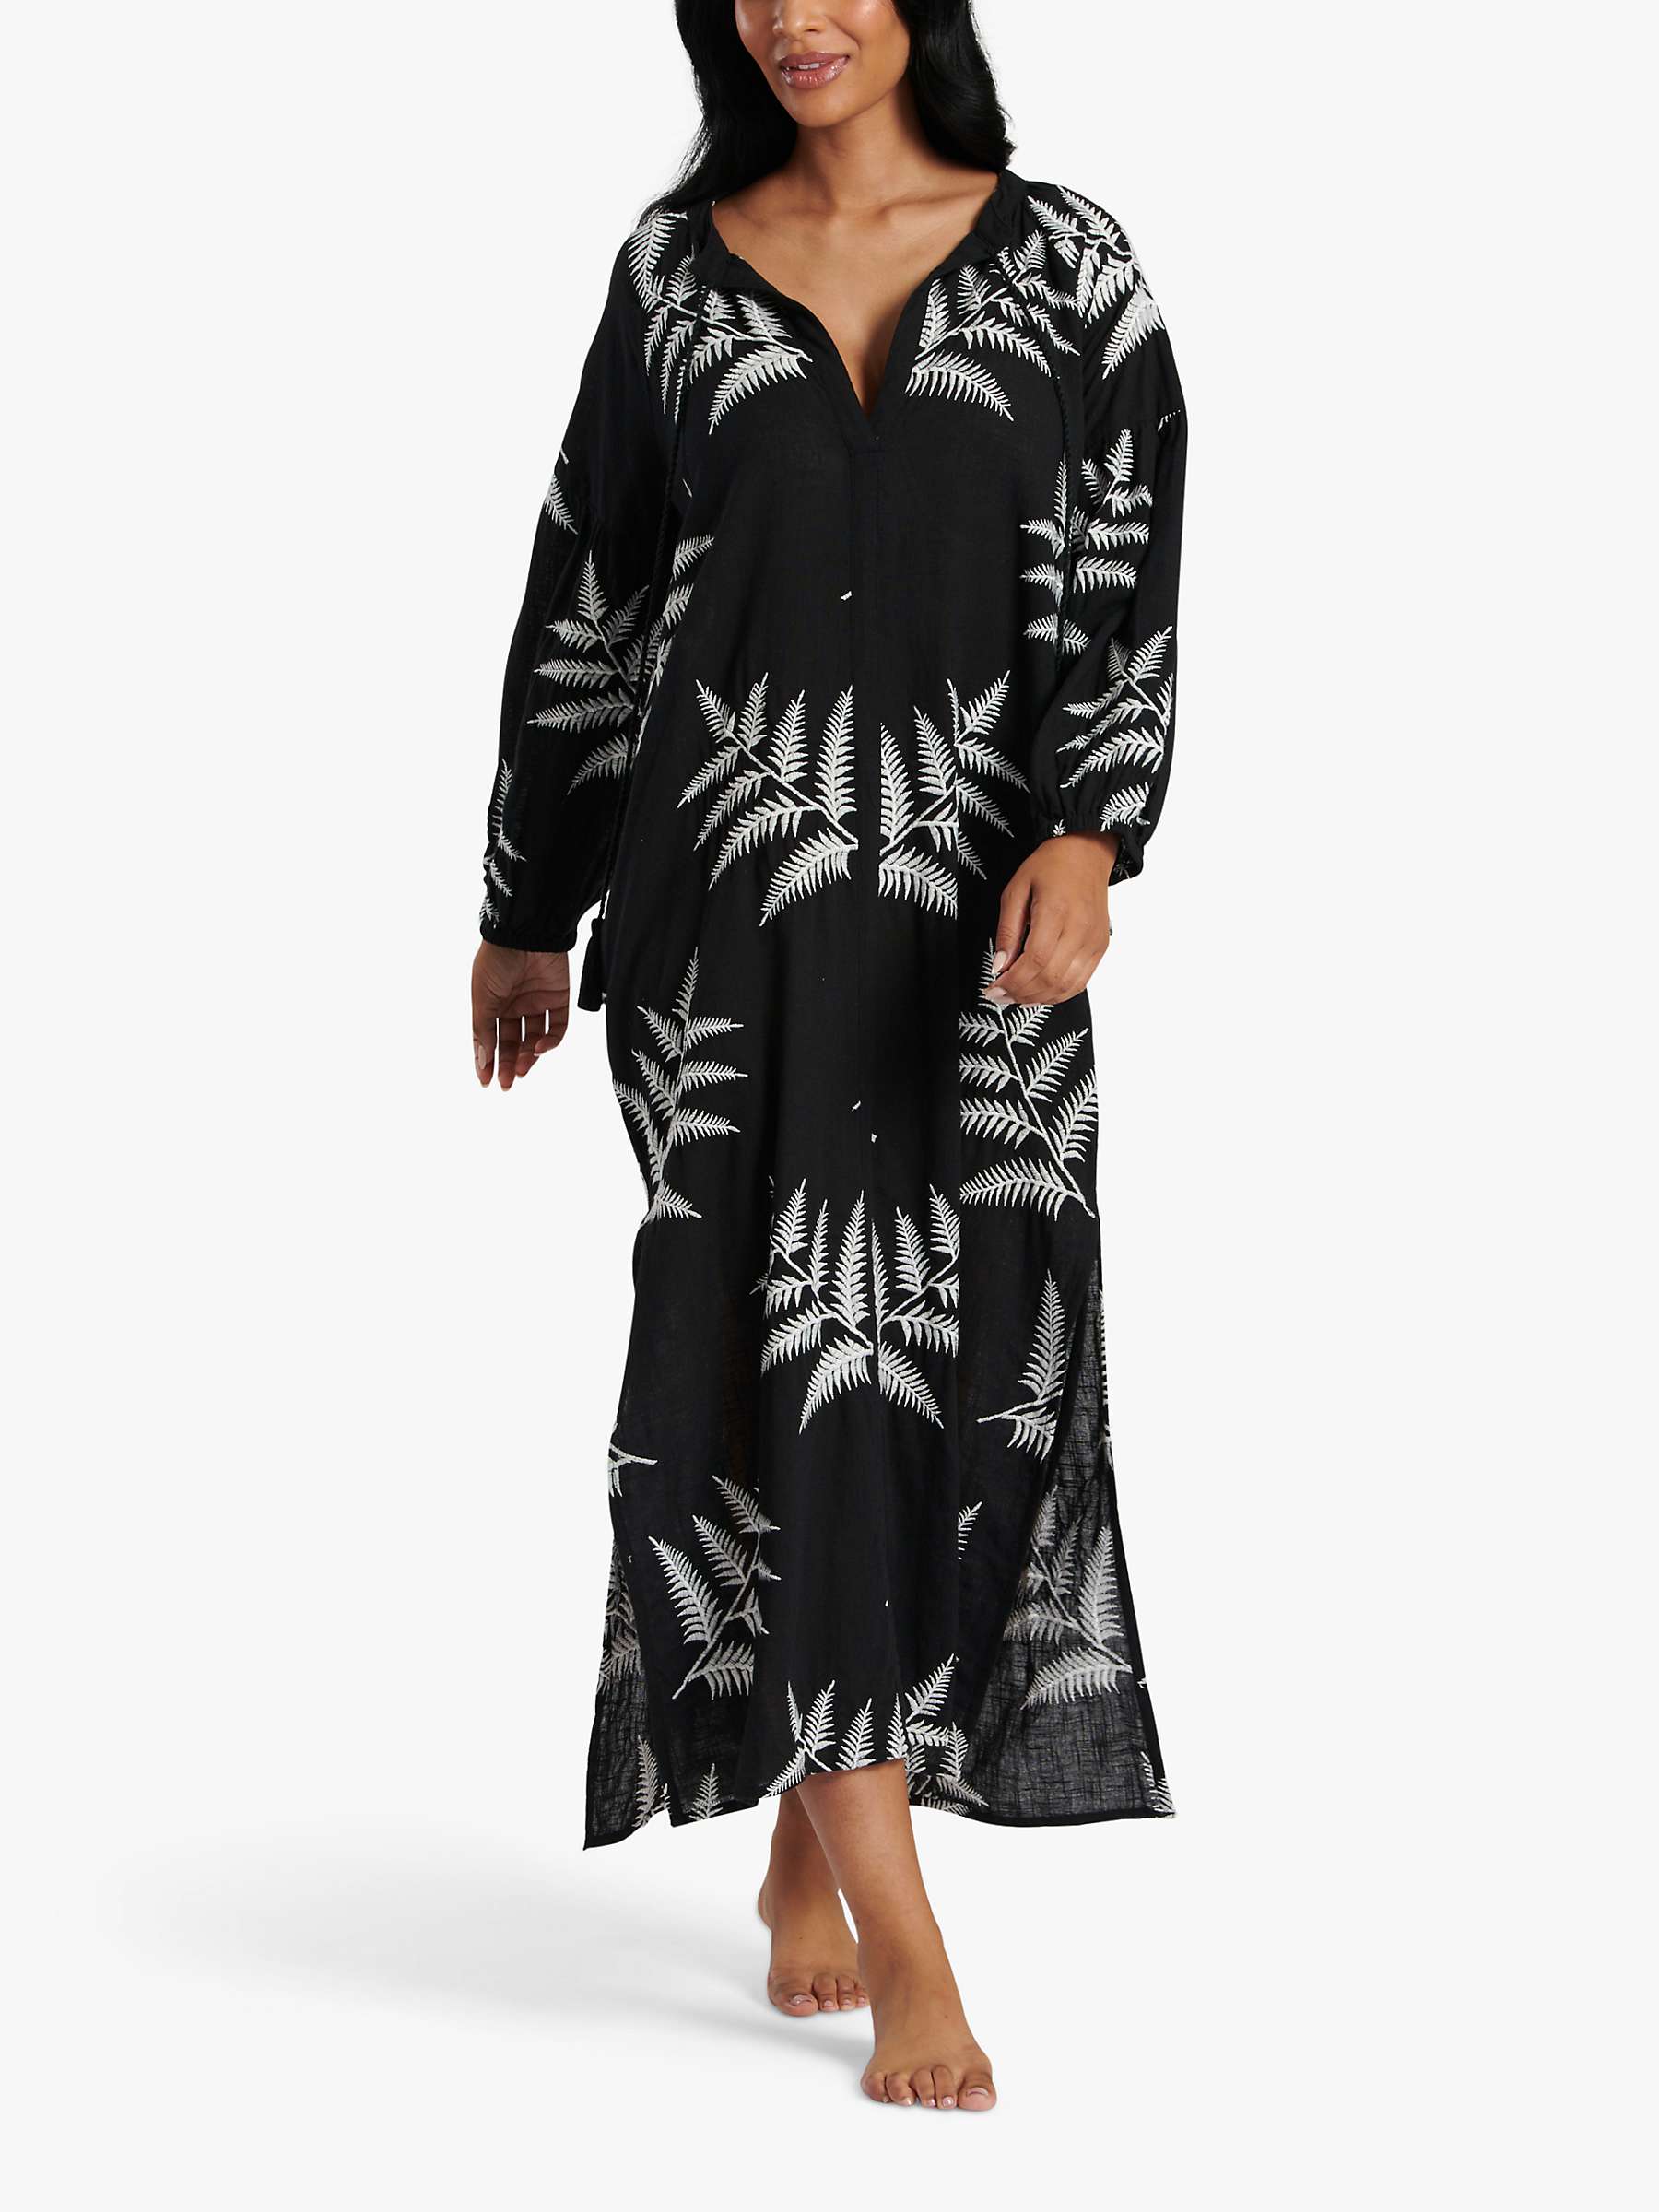 Buy South Beach Palm Embroidered Maxi Dress, Black/White Online at johnlewis.com